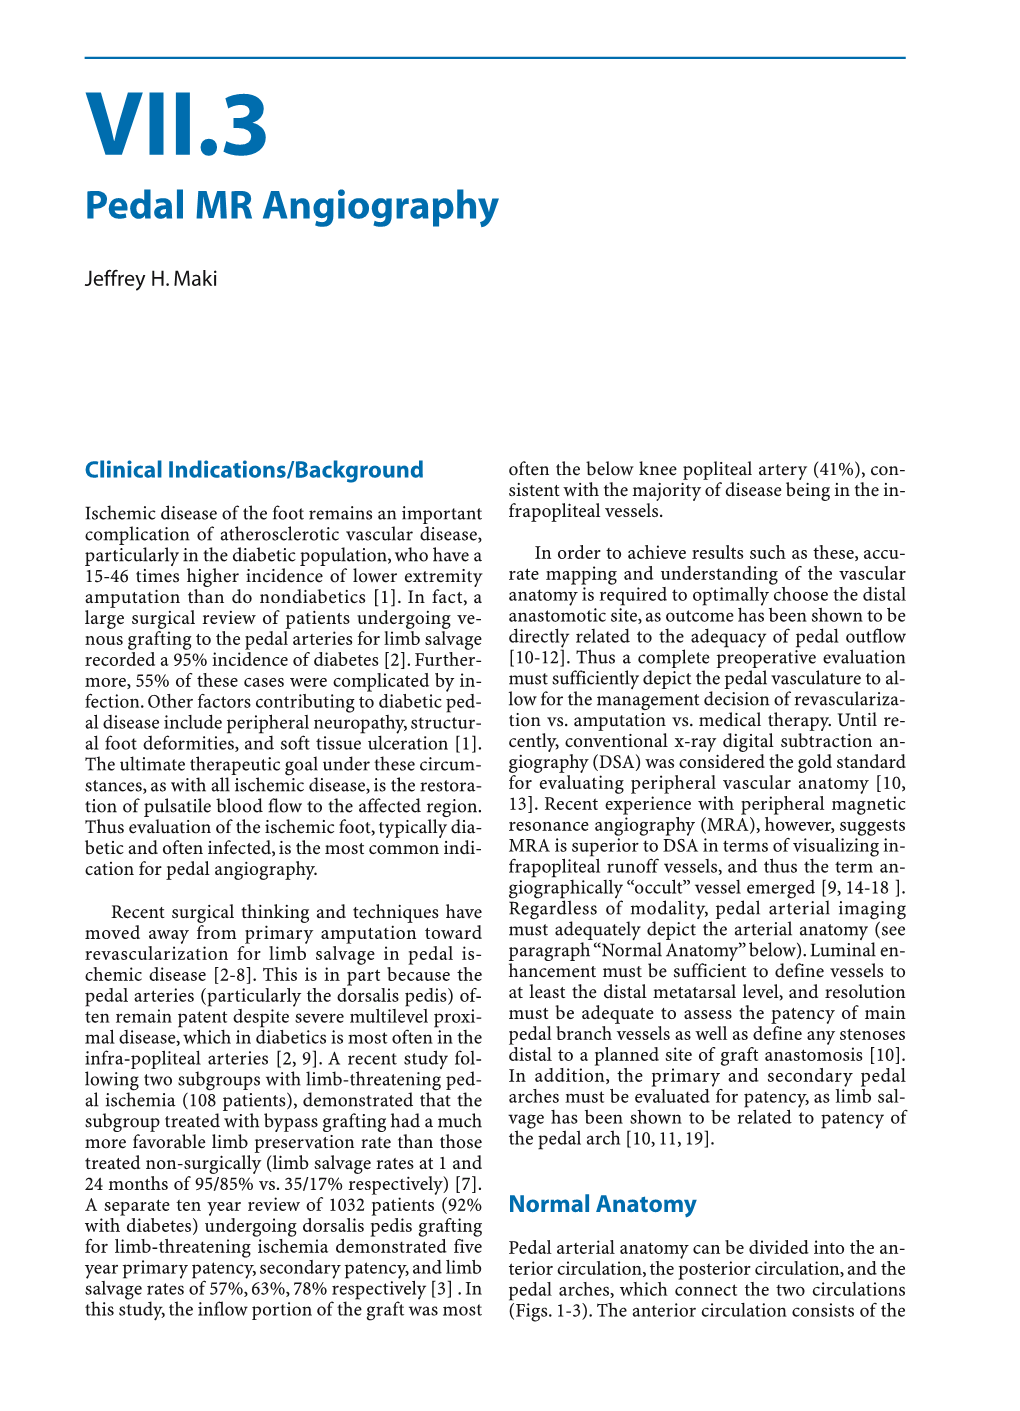 Pedal MR Angiography